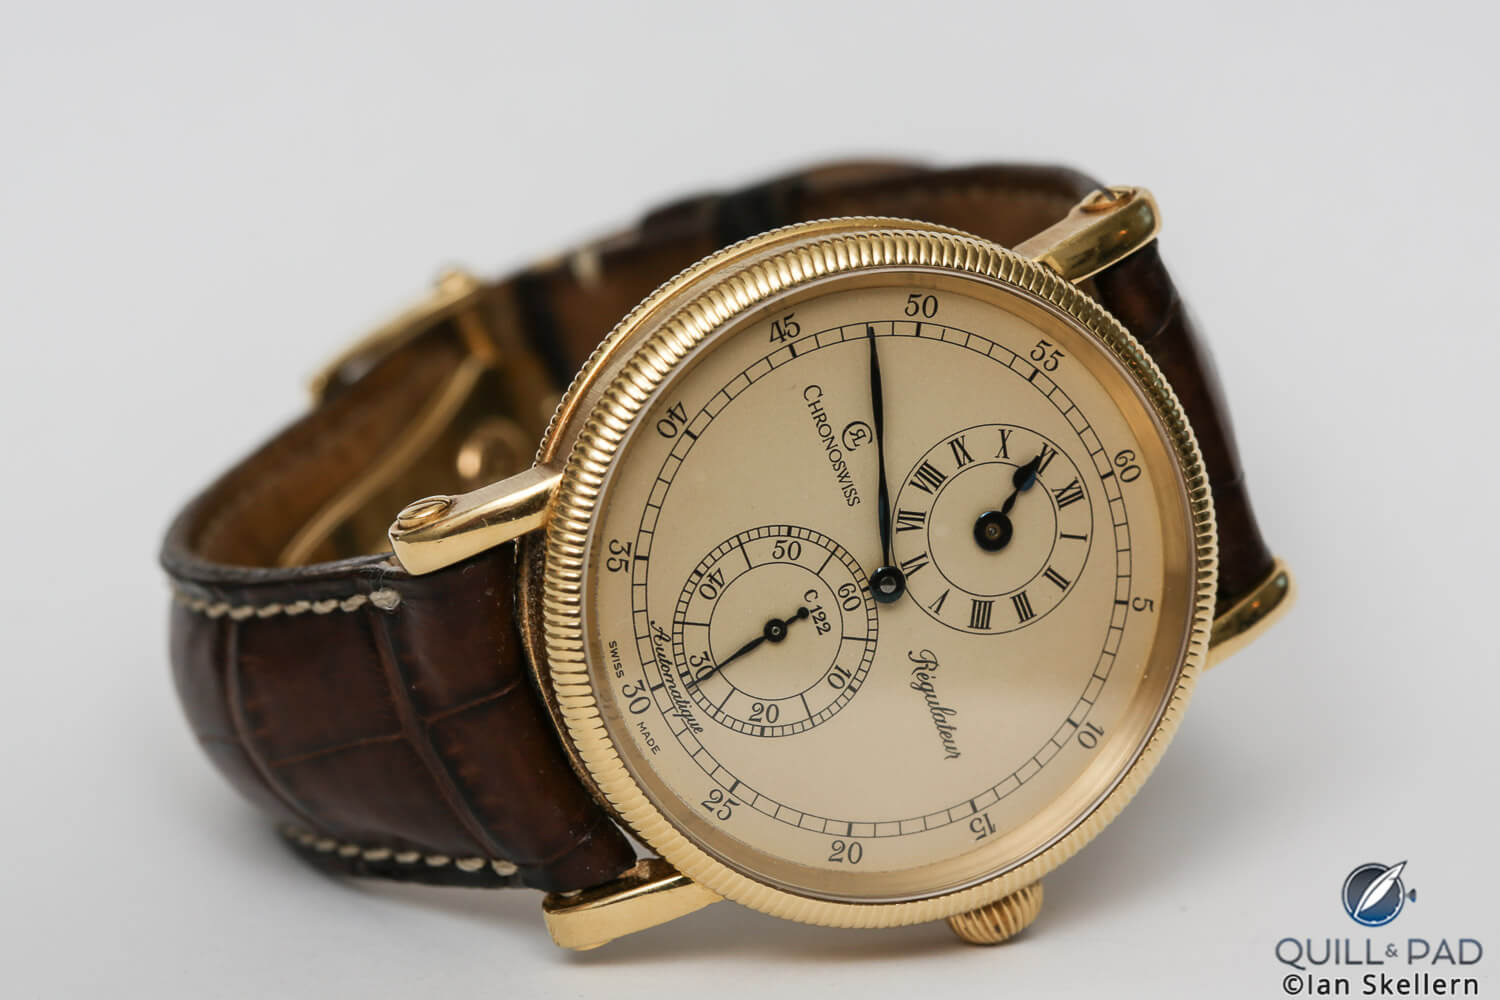 The quintessential Chronoswiss model and the first of its kind: this Régulateur is Gerd-Rüdiger Lang’s own watch